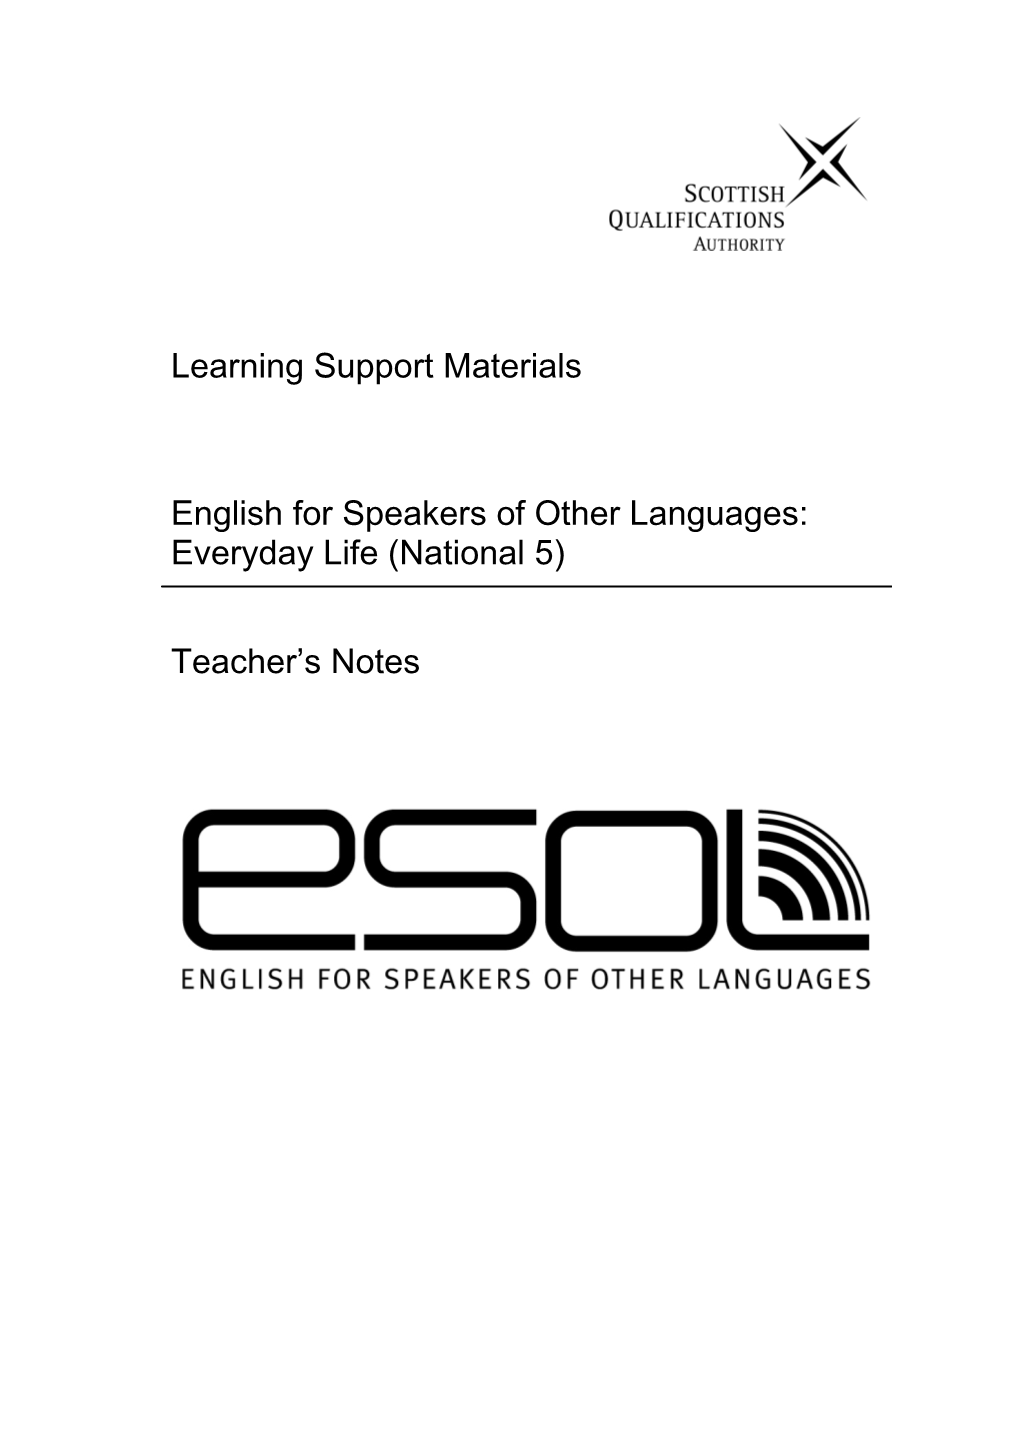 English for Speakers of Other Languages: Everyday Life (National 5)